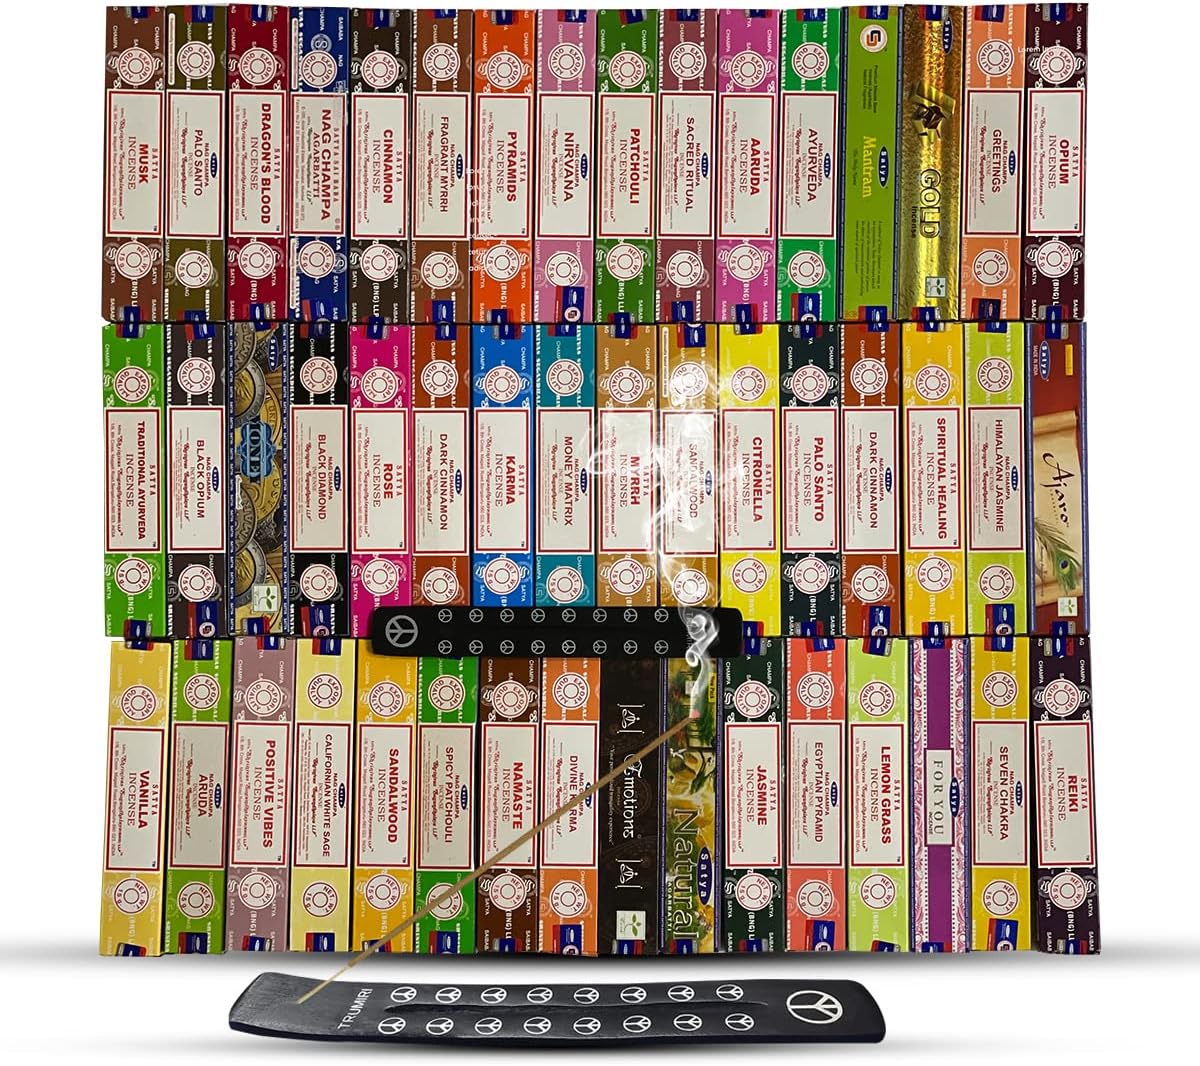 Satya 12 Randomly Selected Scents Incense Sticks Variety Pack - 12 Packs of 15g - Total Approx 180 sticks